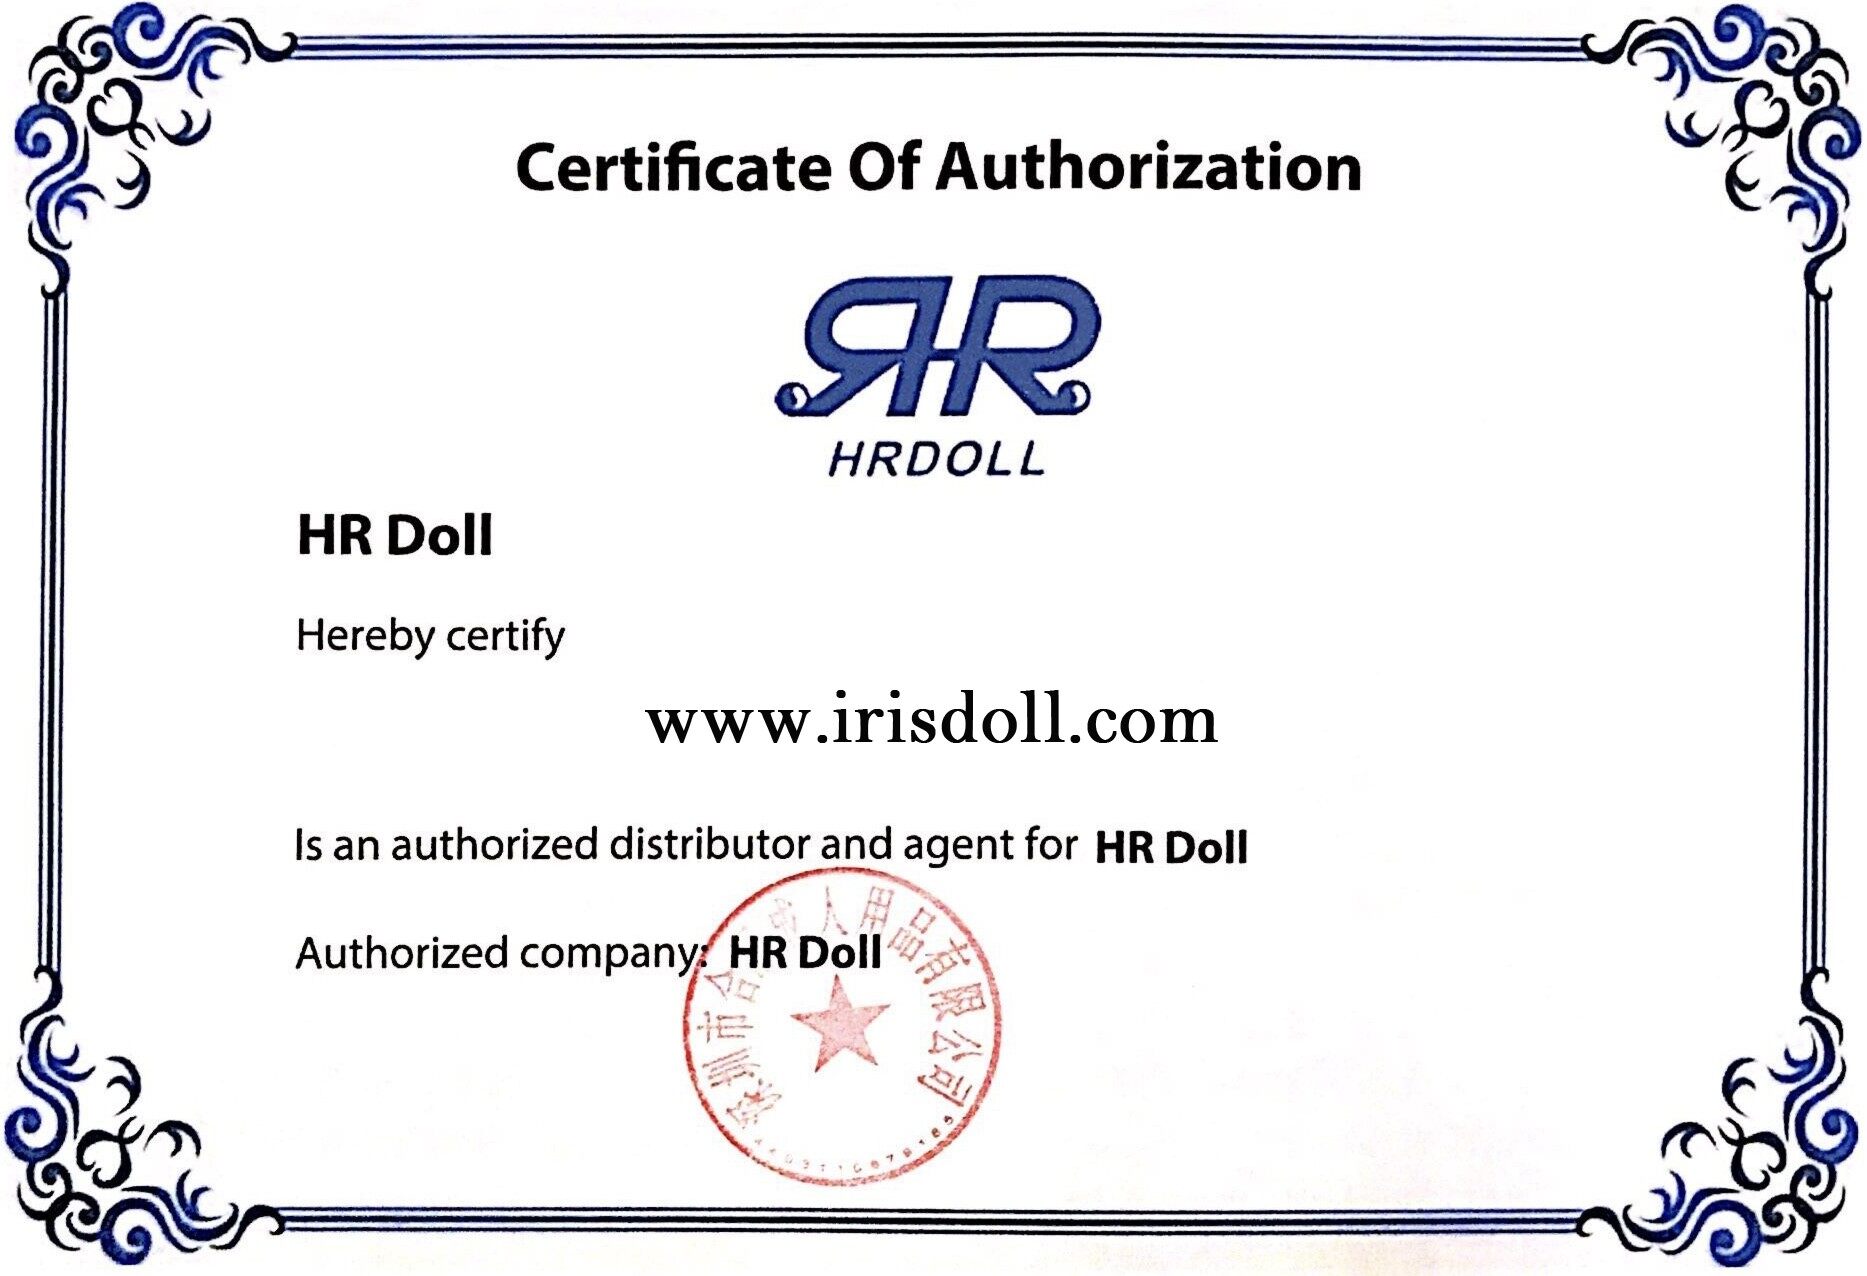 Irisdoll is the authorized HR Sex Doll reseller. We guarantee that all HR Love dolls sold on our website are authentic.